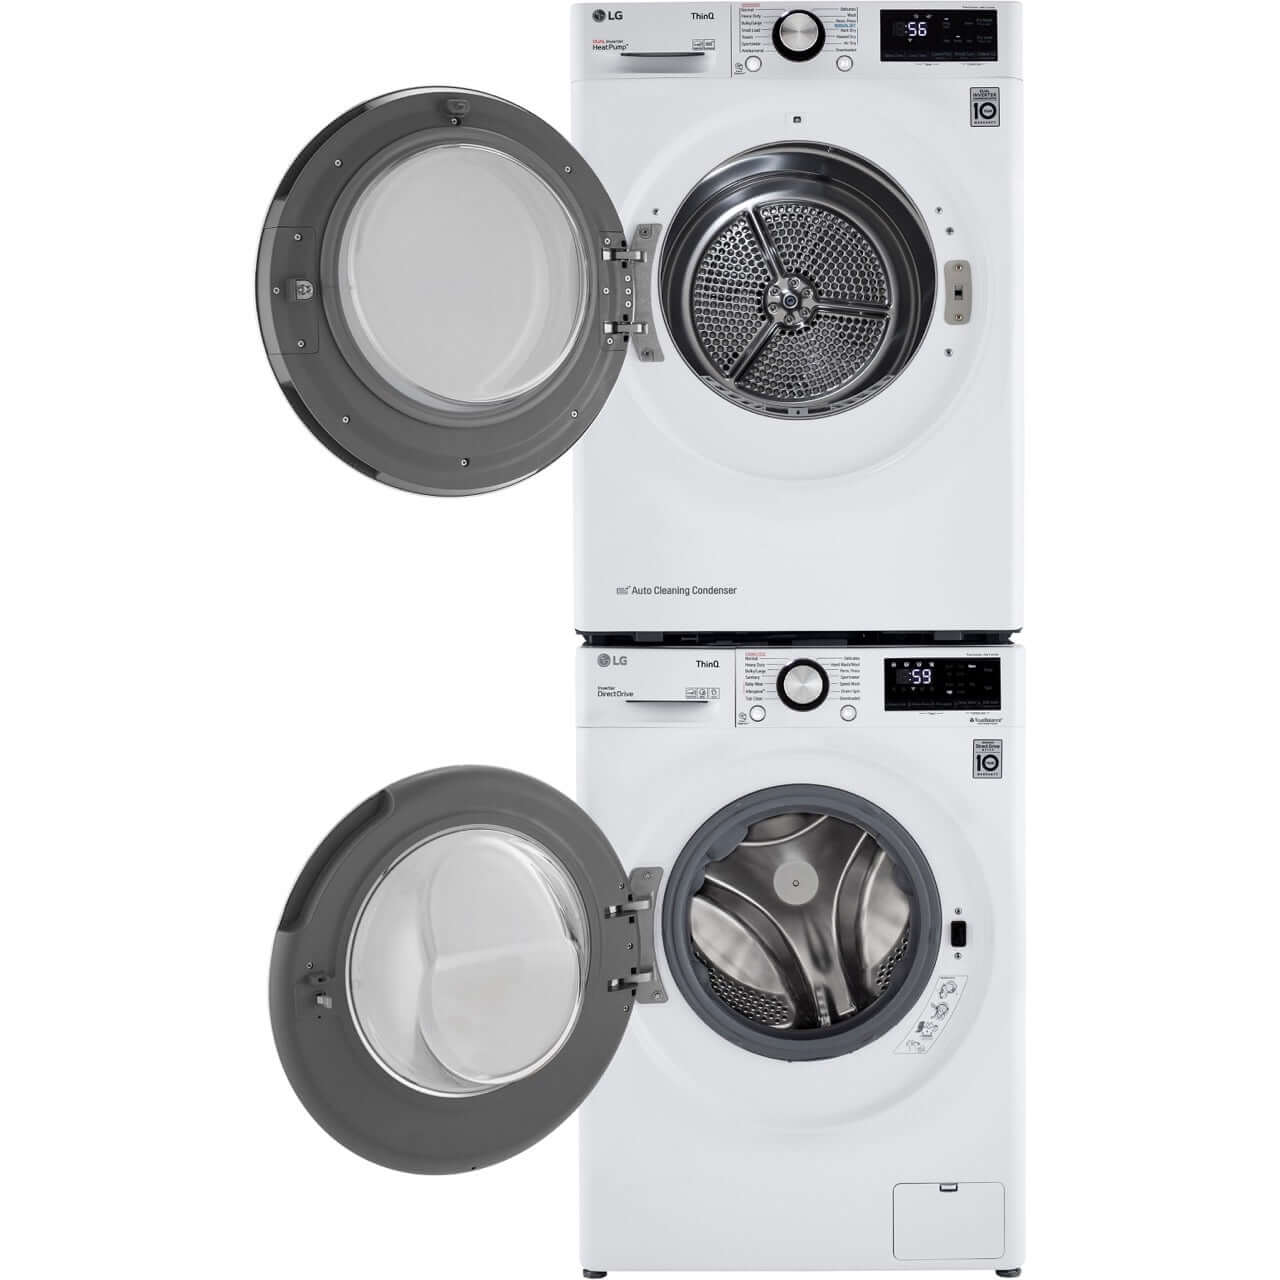 LG 4.2-Cu. Ft. Compact Front Load Dryer with Dual Inverter HeatPump Technology in White (DLHC1455W)